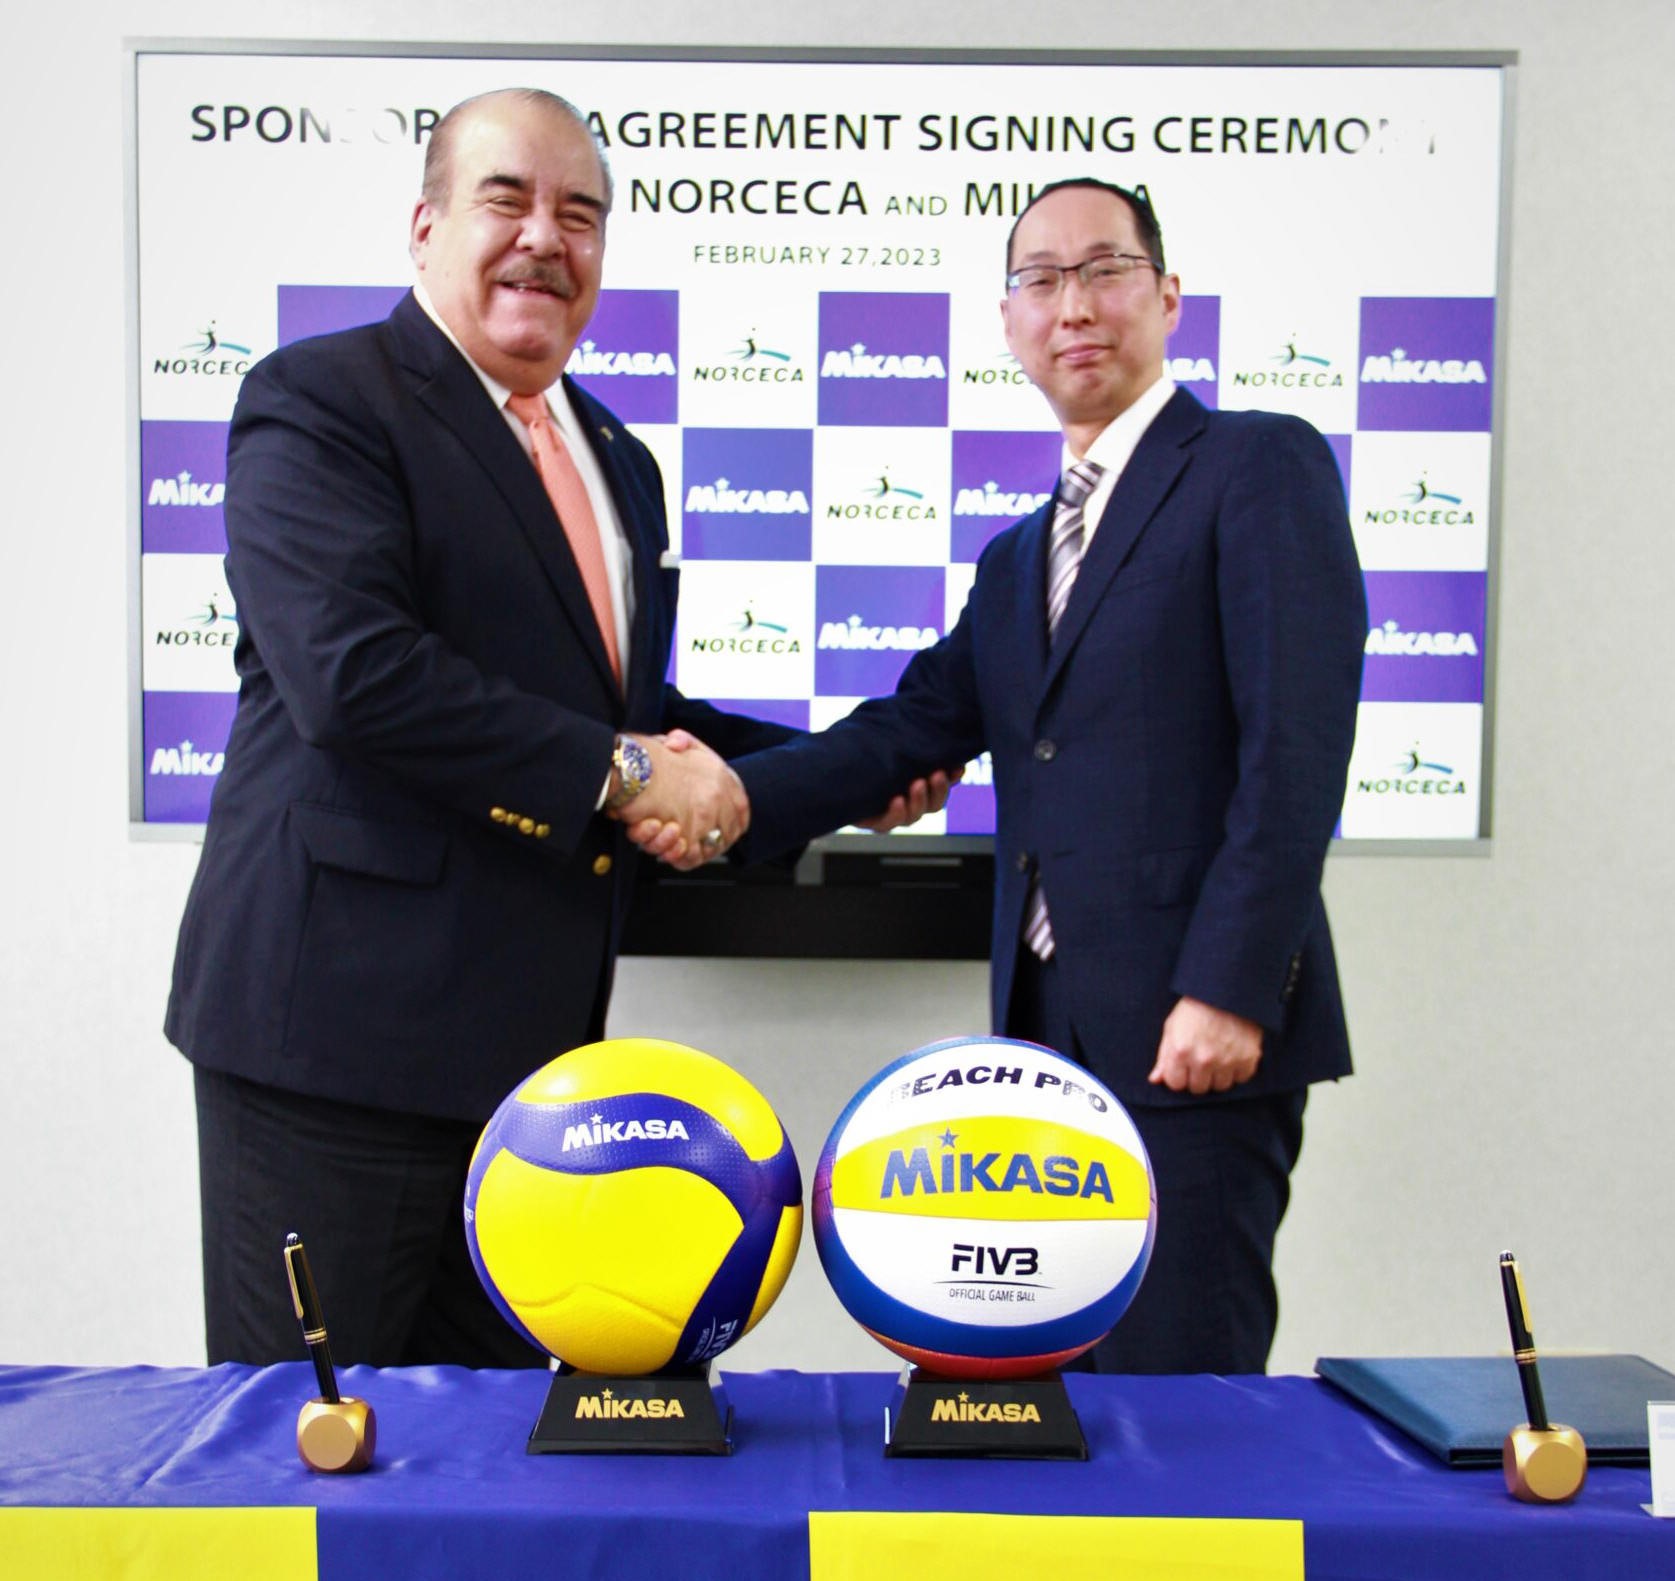 MIKASA and NORCECA Signing Ceremony